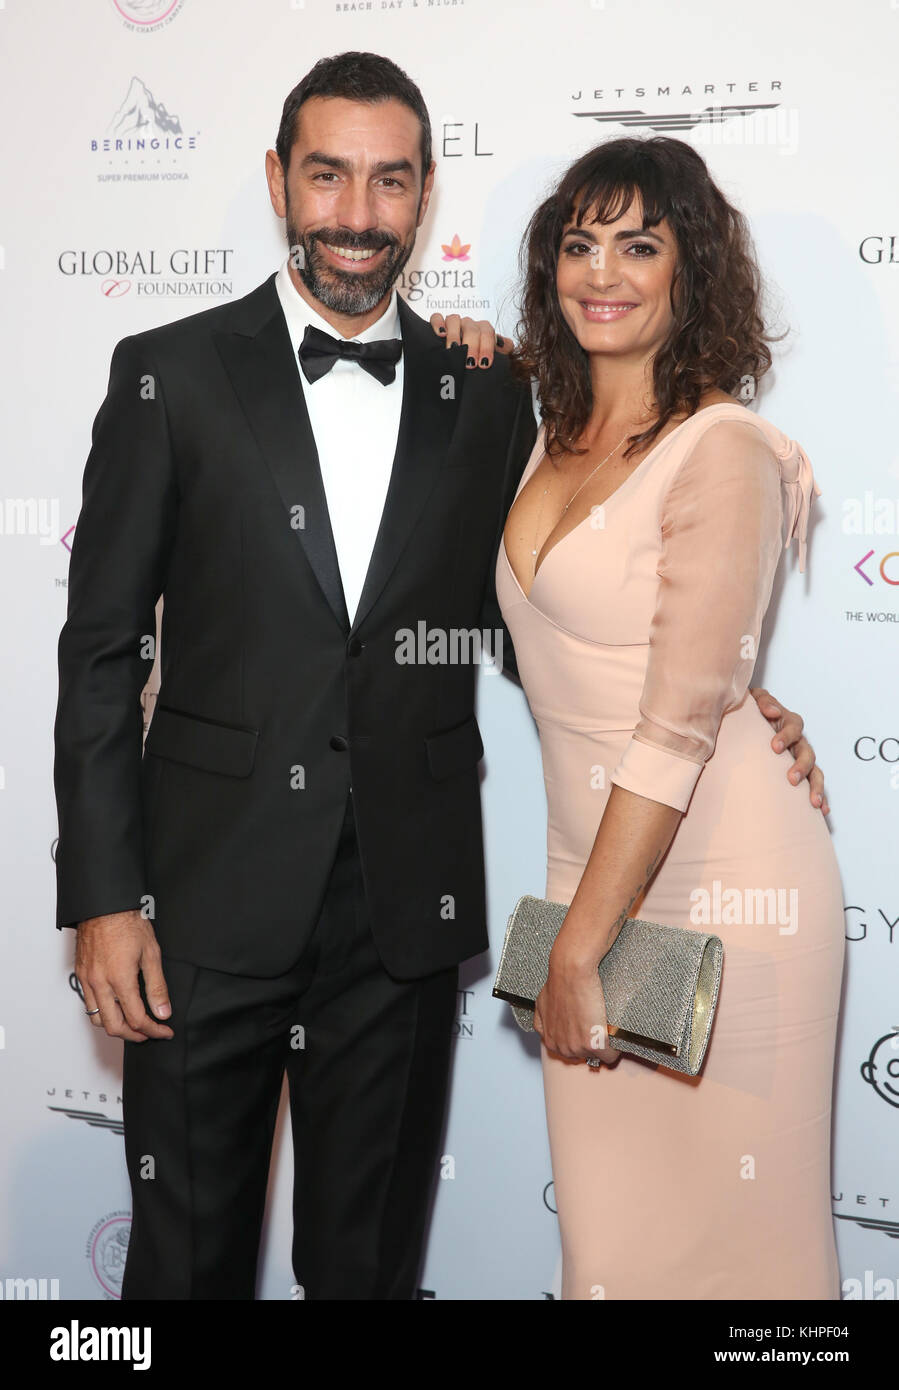 Robert Pires and Jessica Lemarie-Peres attending the Global Gift Gala held at The Corinthia Hotel in London. Stock Photo